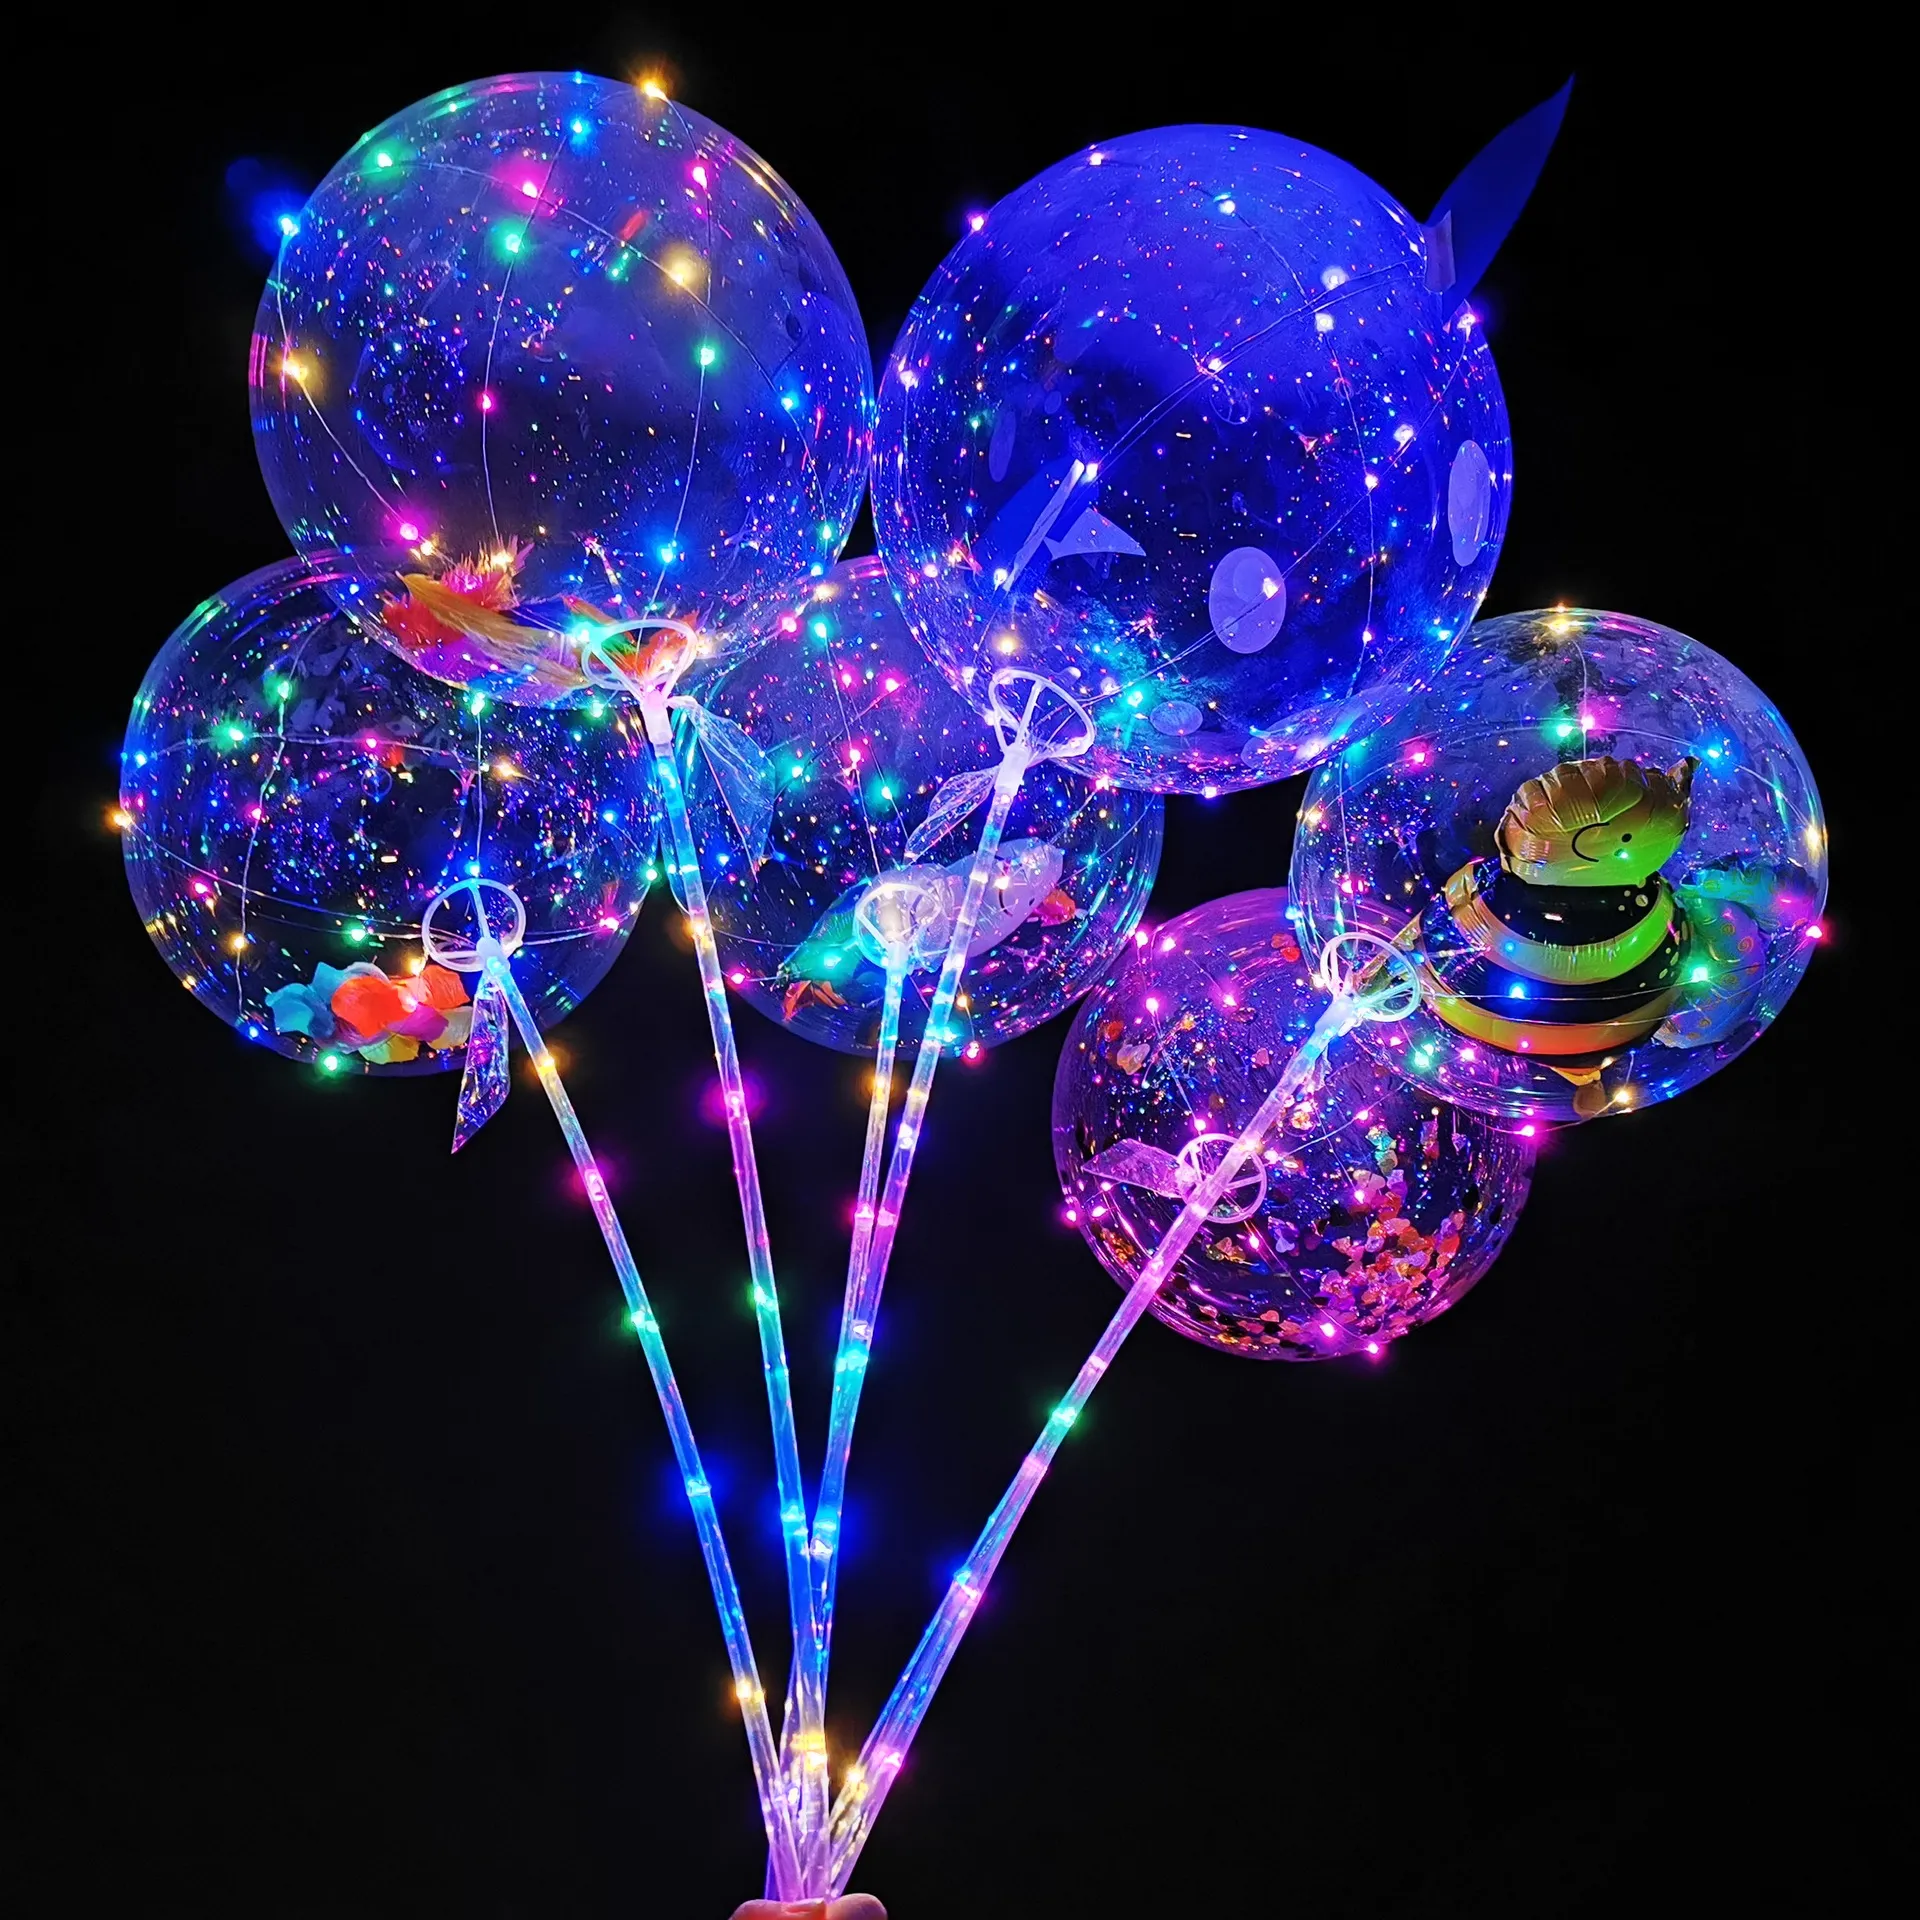 diy Multicolor color Led Balloons Novelty Lighting Bobo Ball Wedding Balloon Support Backdrop Decorations Light Baloon Weddings Night Party Supplies friend gift